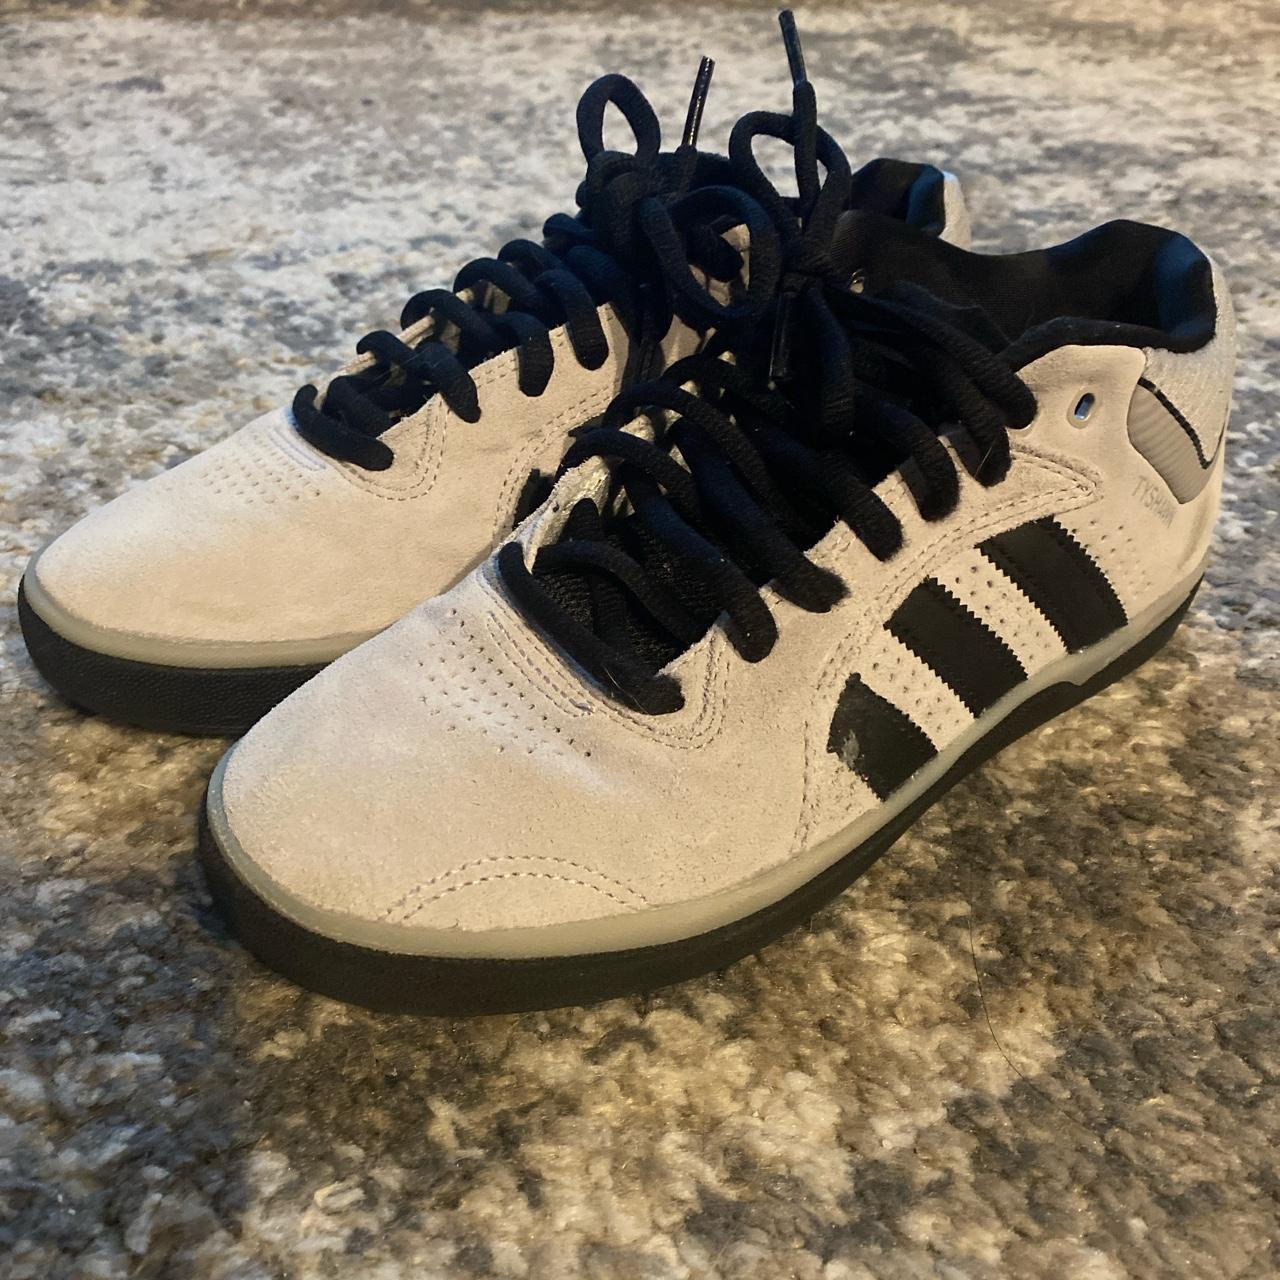 Adidas Men's Black and Grey Trainers